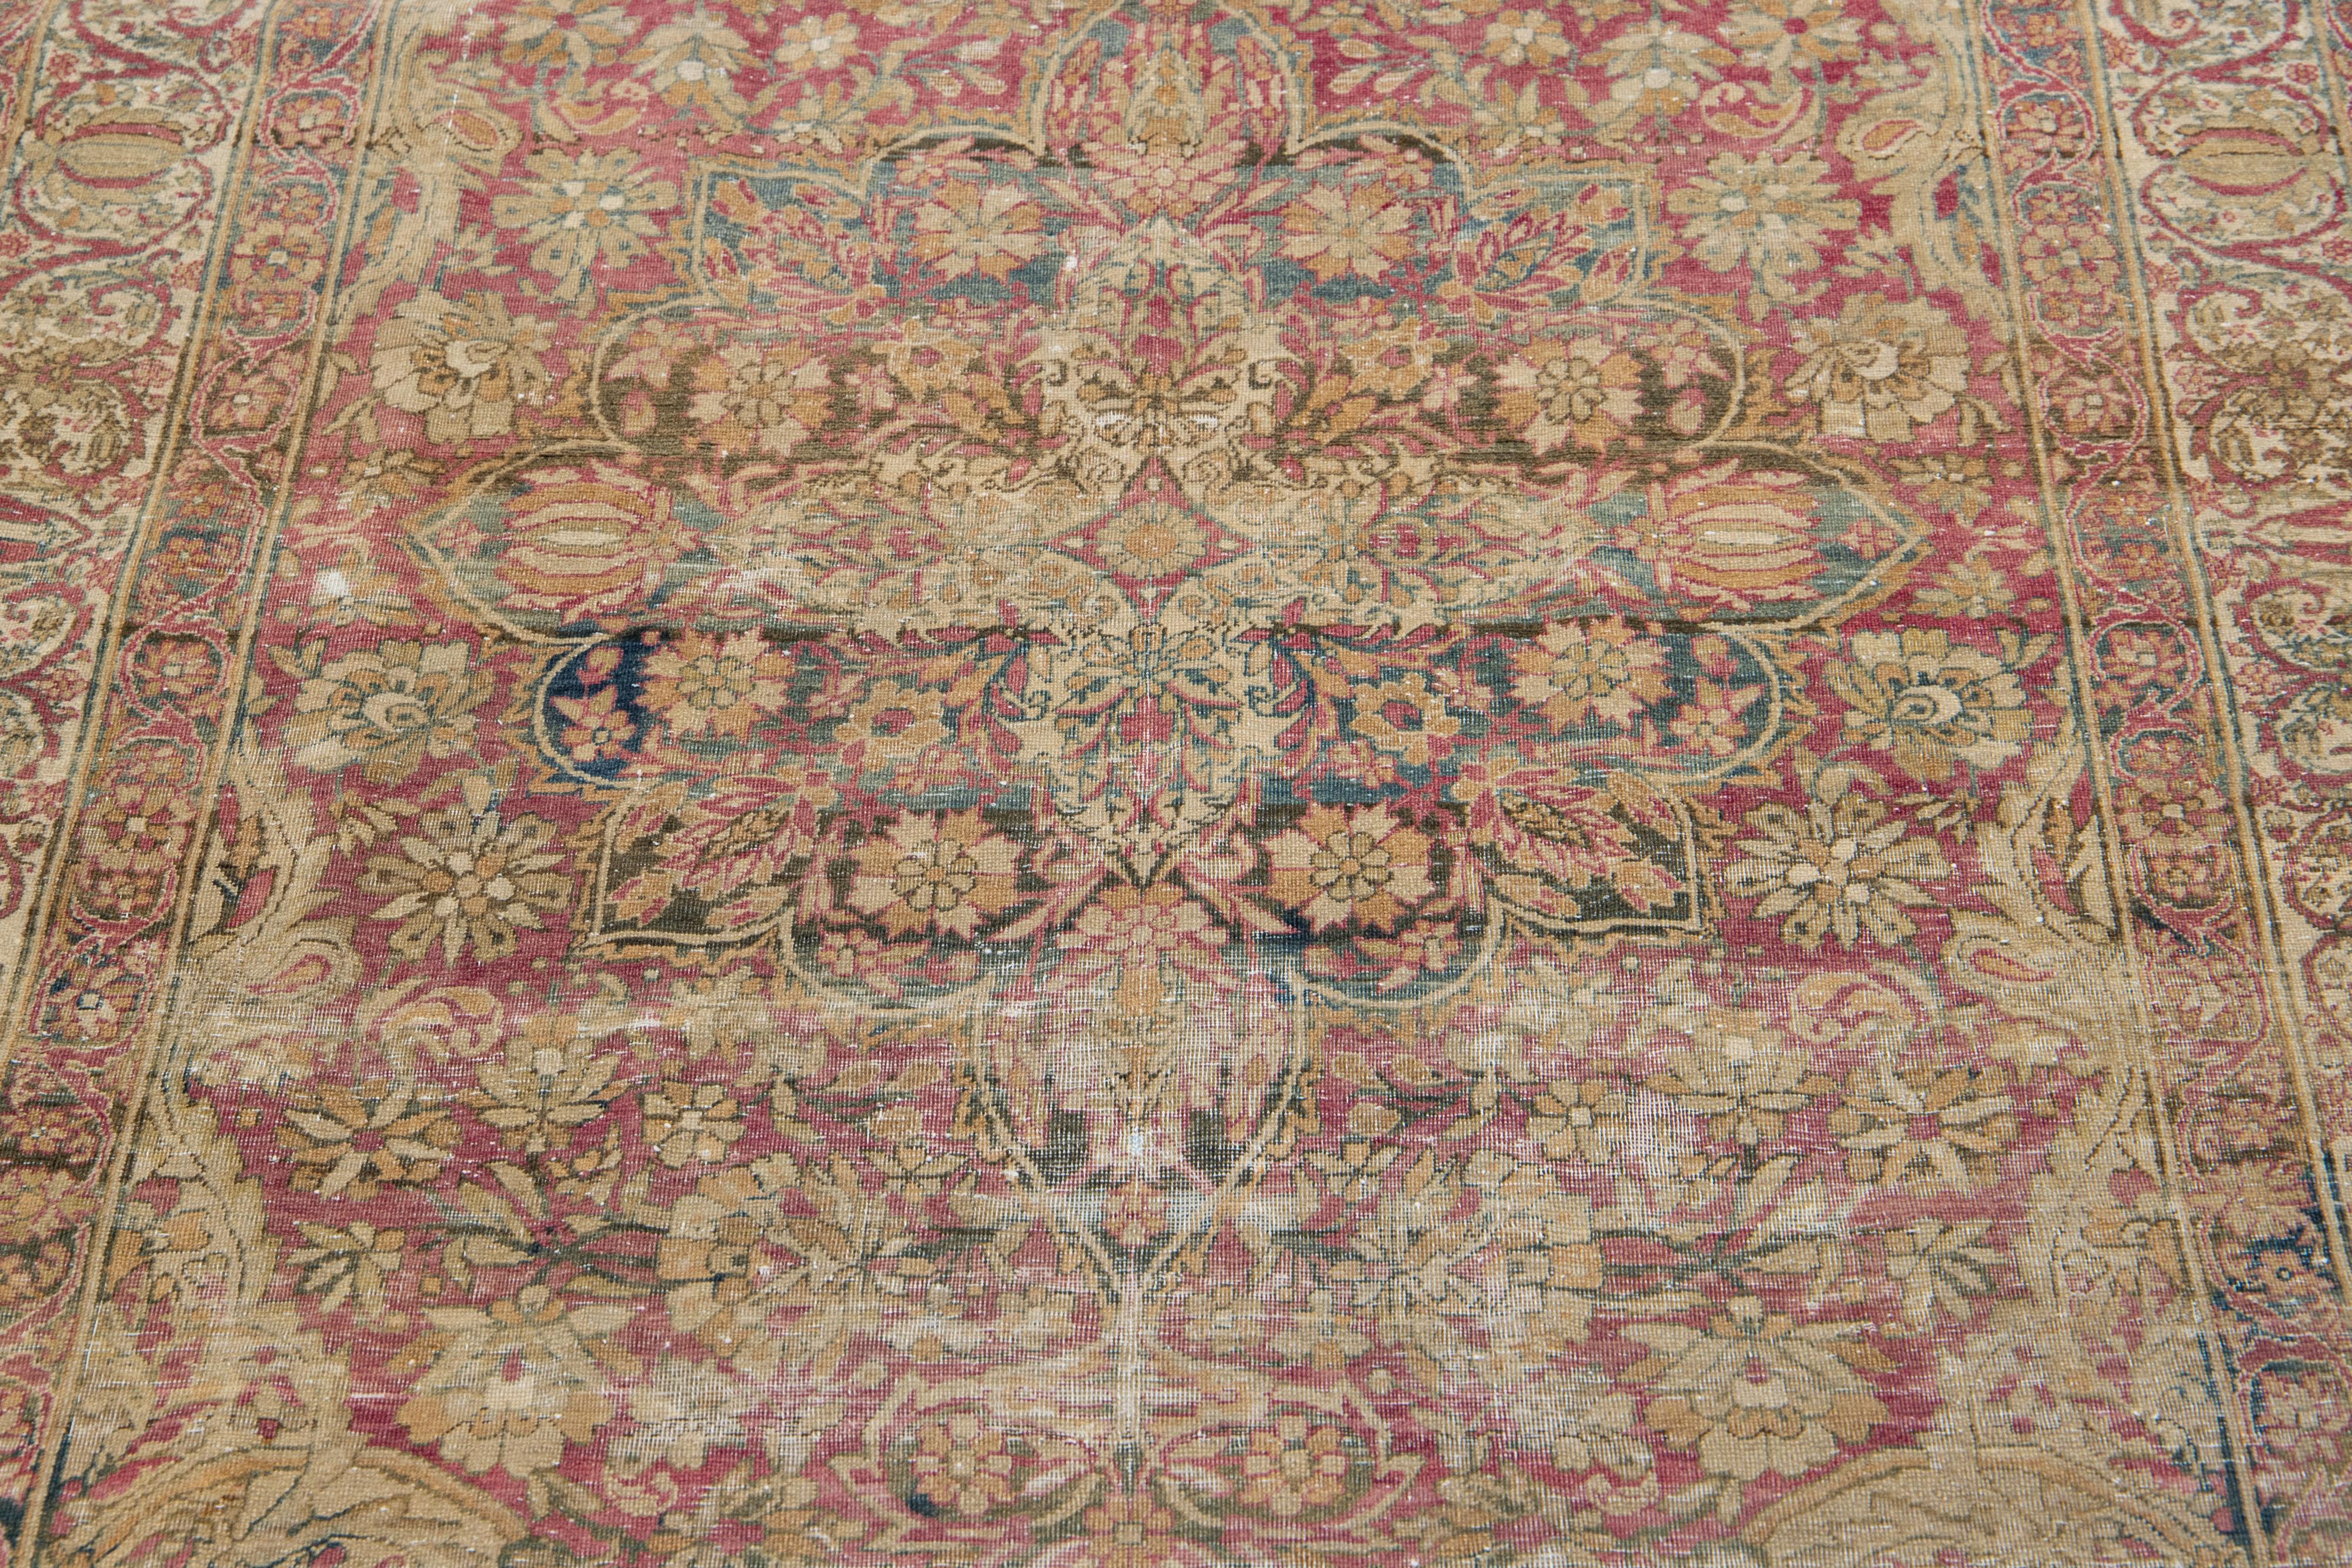 1920s Antique Kerman Handmade Wool Rug With Floral Medallion In Red In Good Condition For Sale In Norwalk, CT